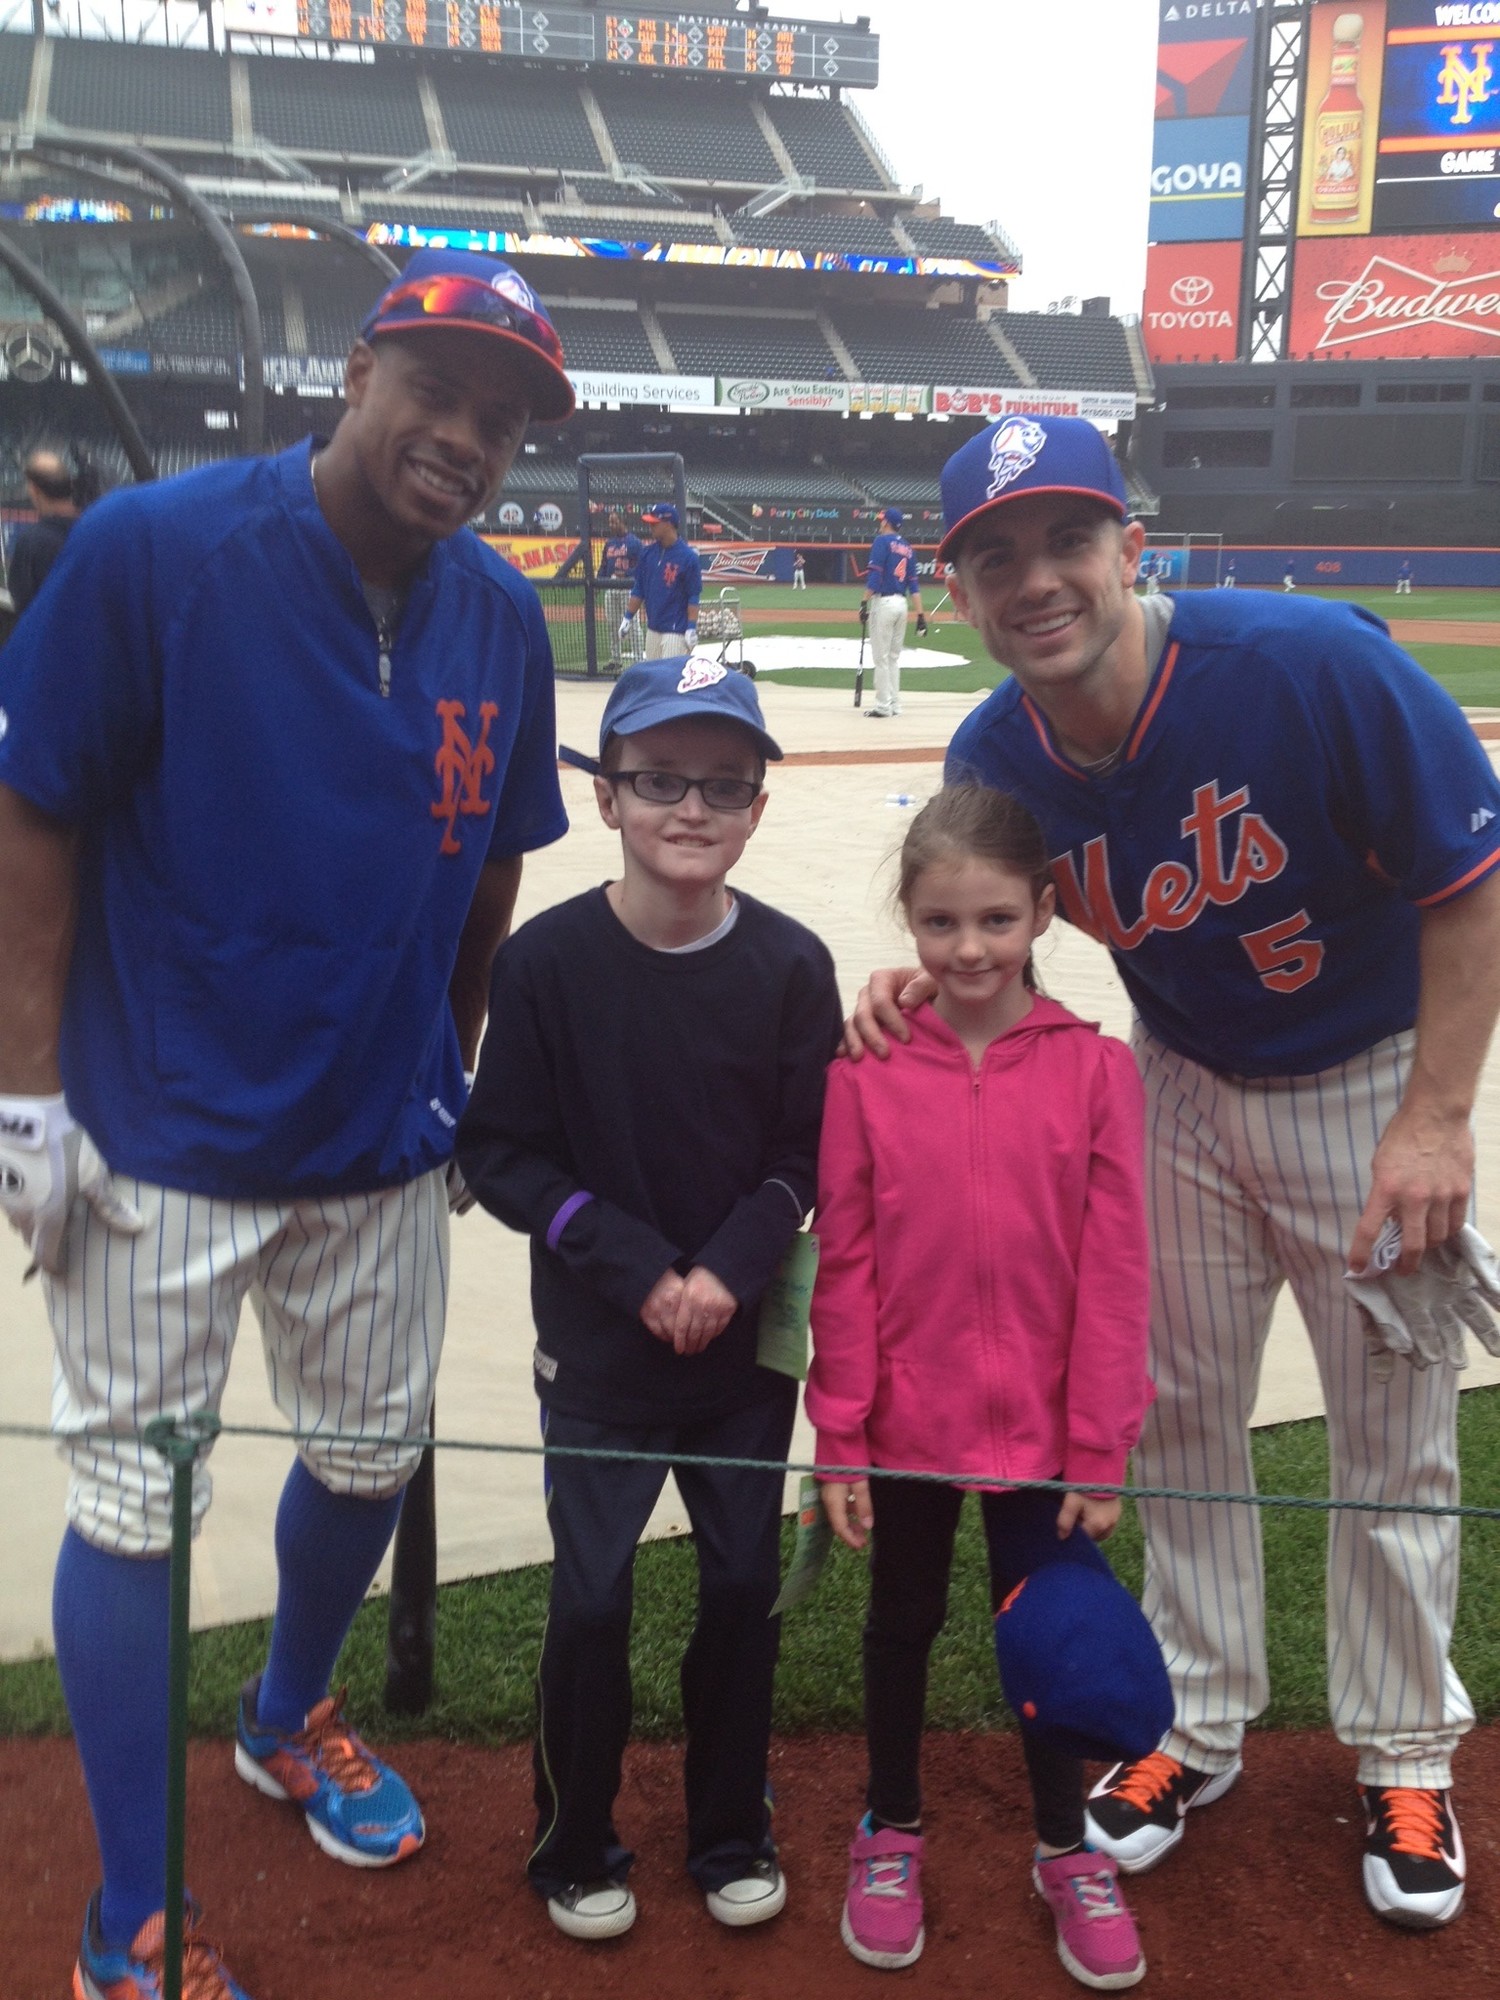 Robbie met New York Mets players David Wright and Curtis Granderson at Citi Field in May.